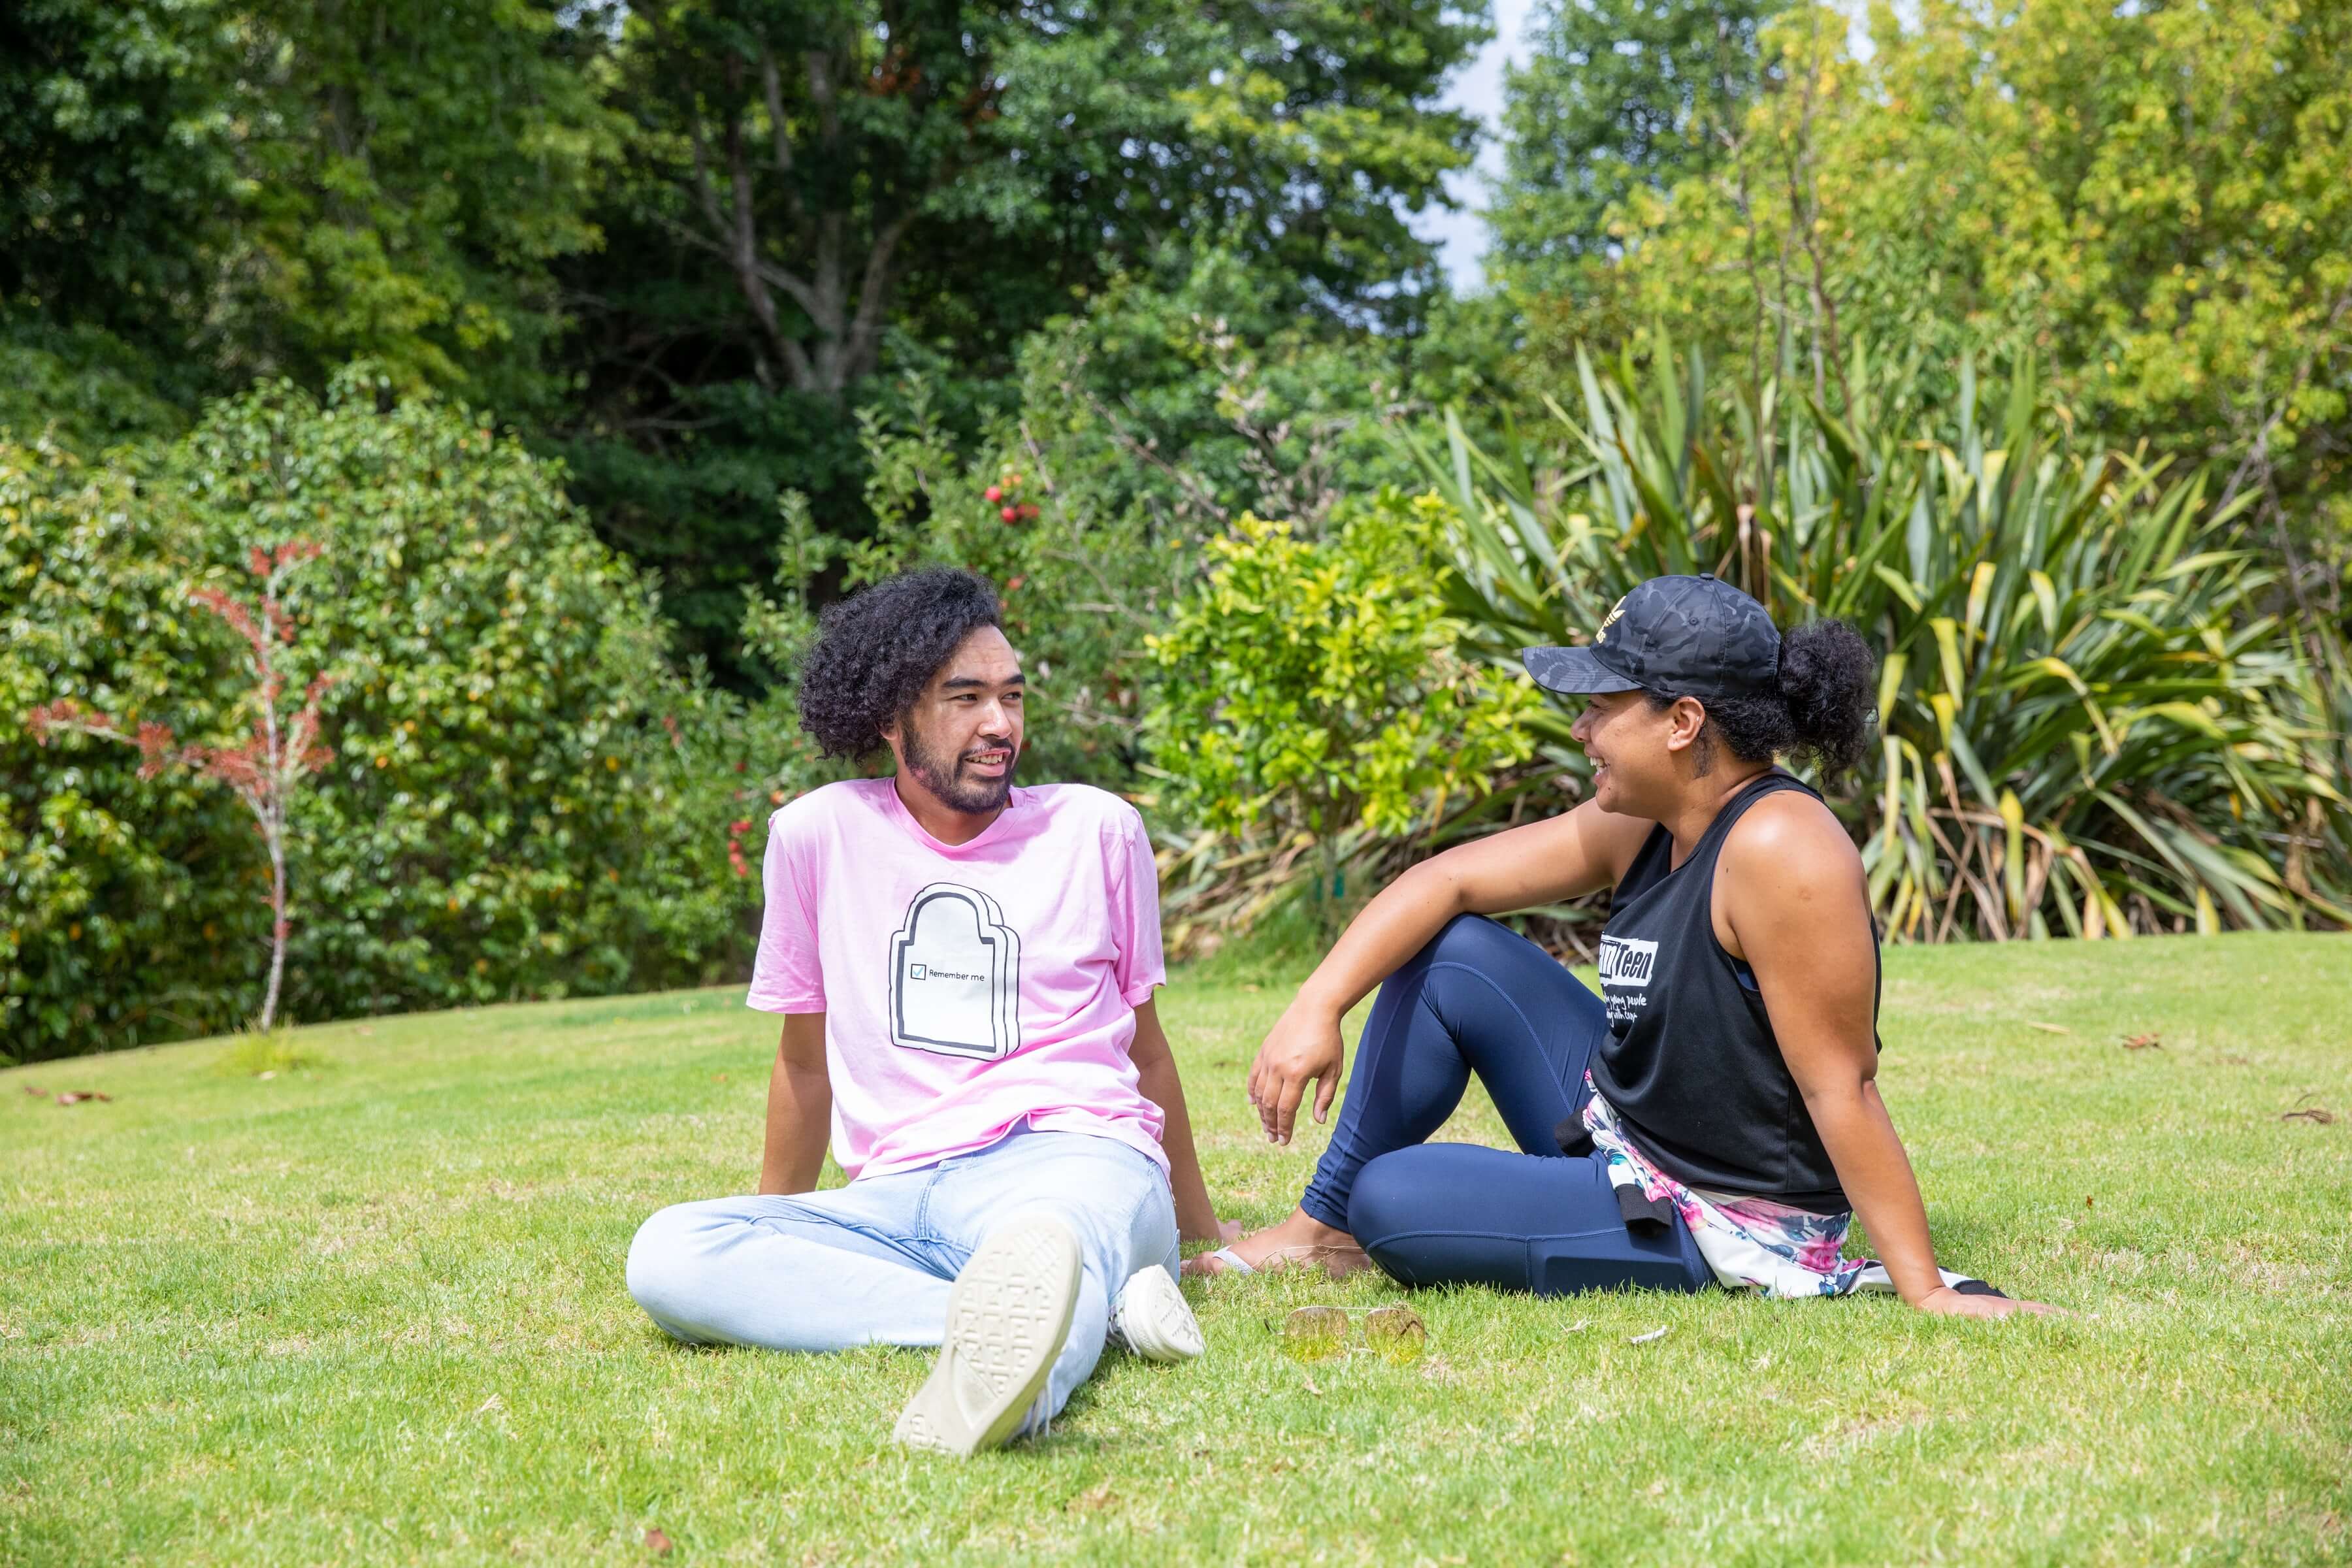 two young people sitting on the grass at a park and having a conversation